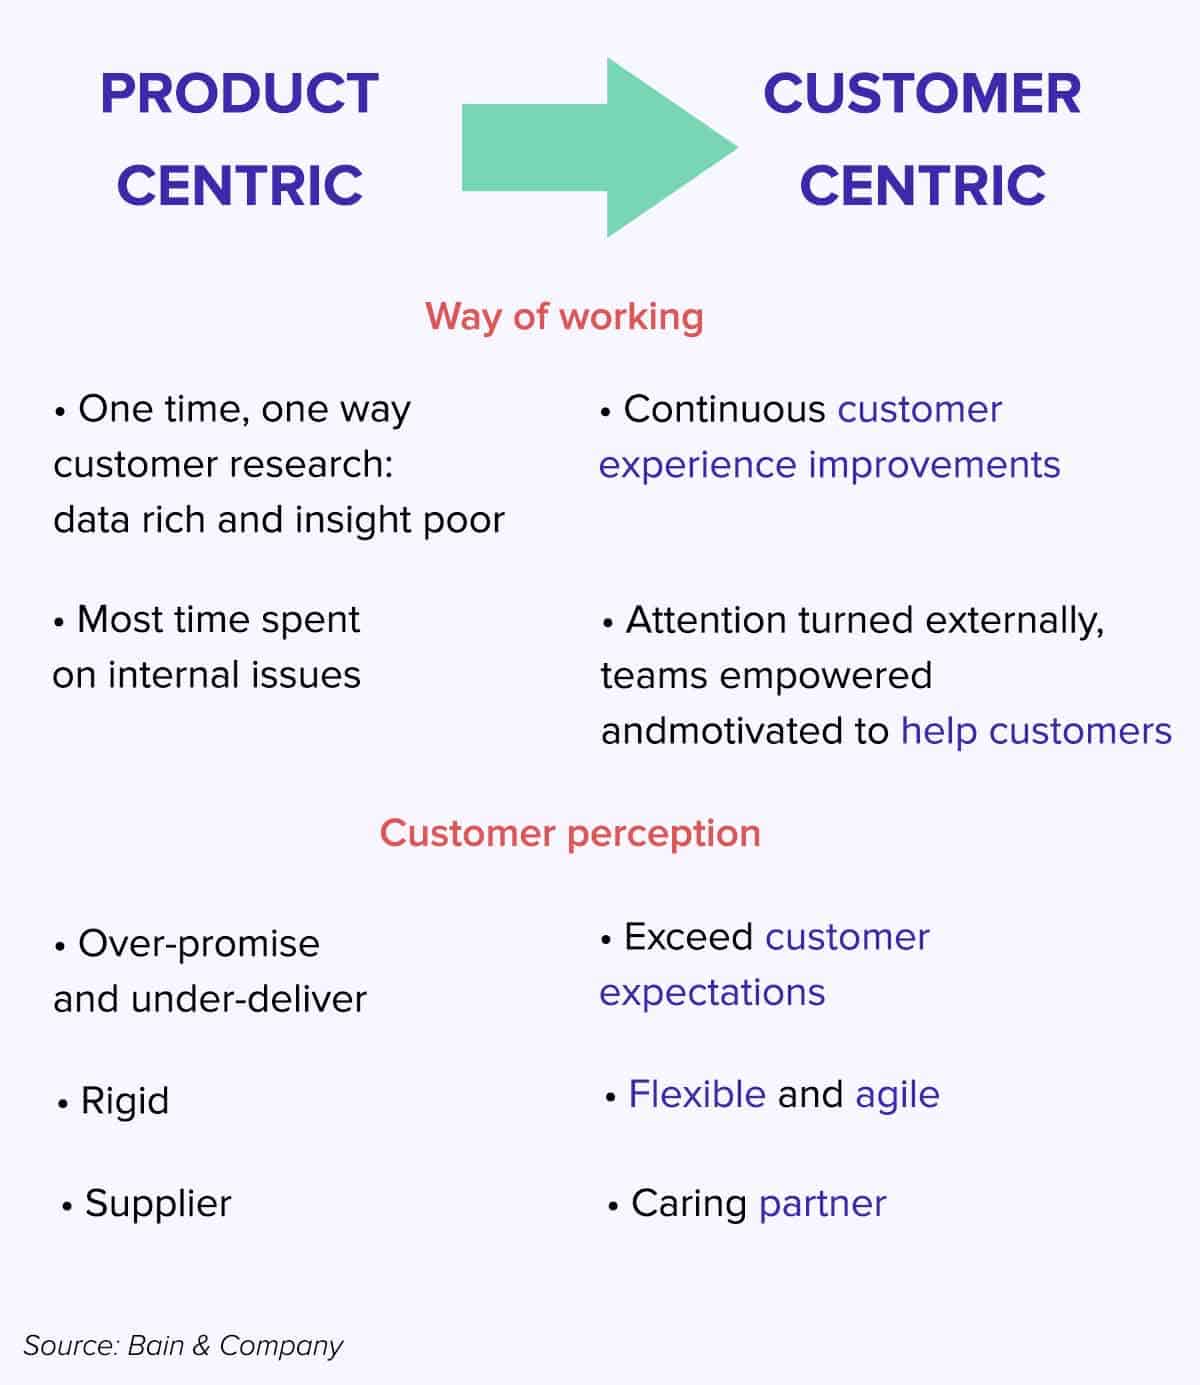 Product centric vs Customer centric